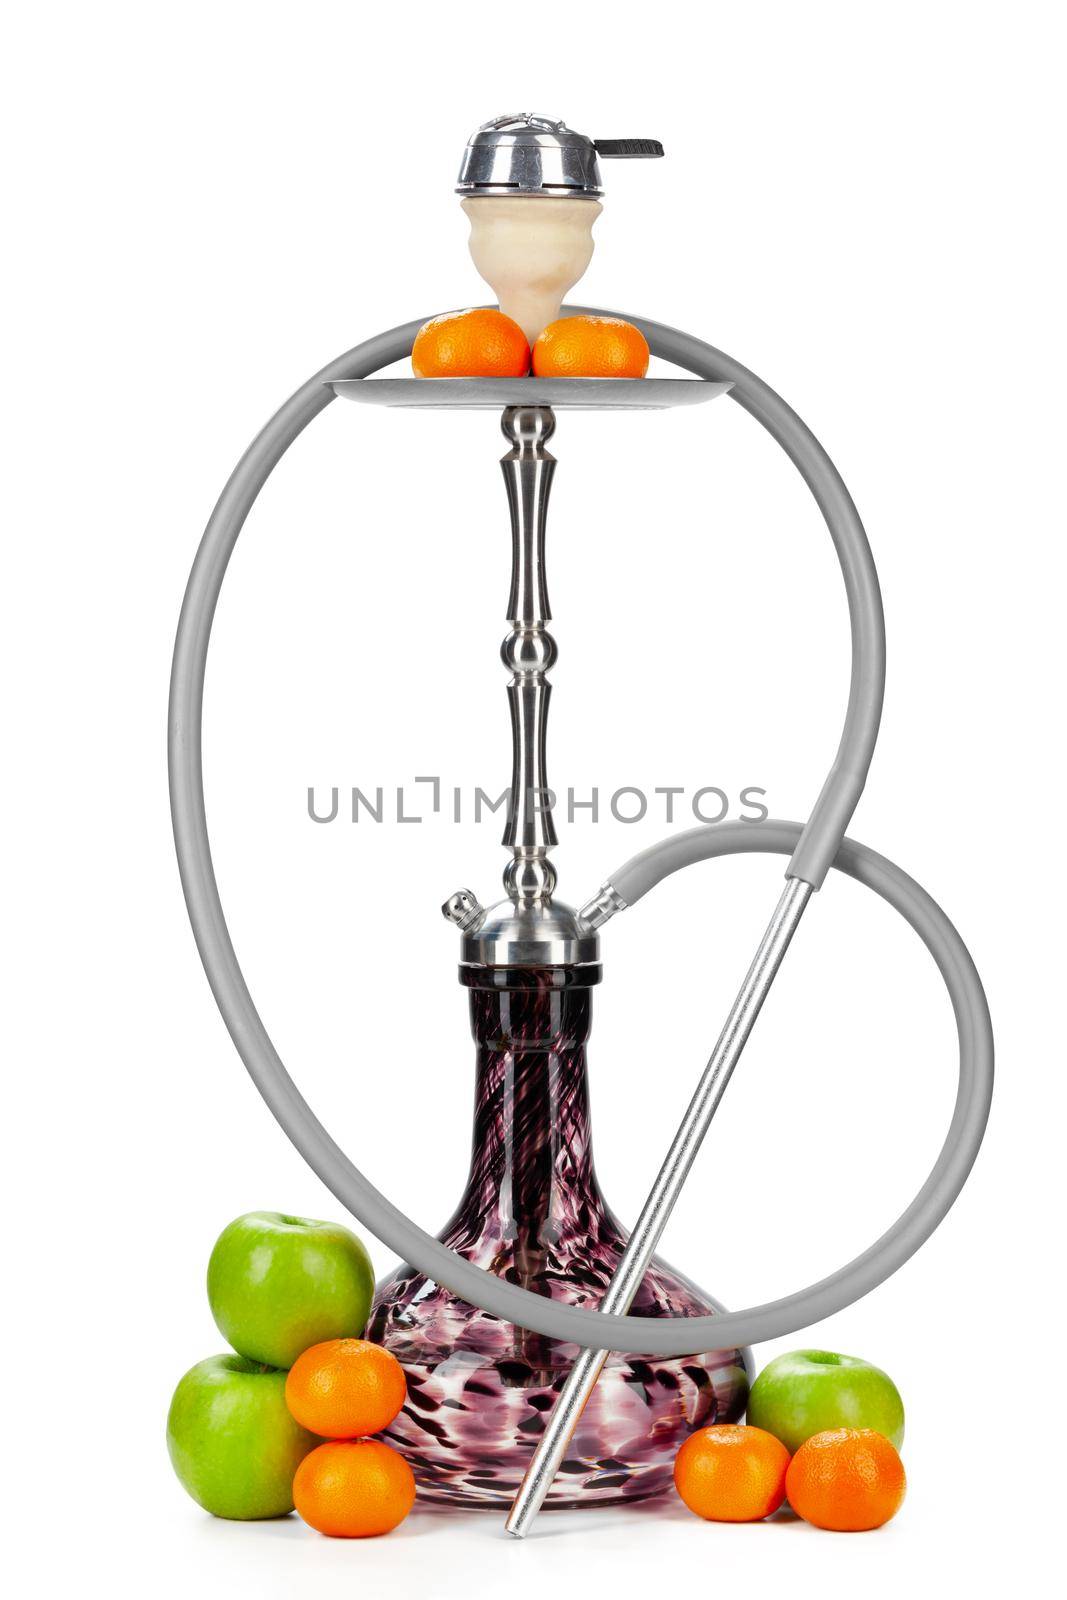 Hookah with fruits isolated on white background